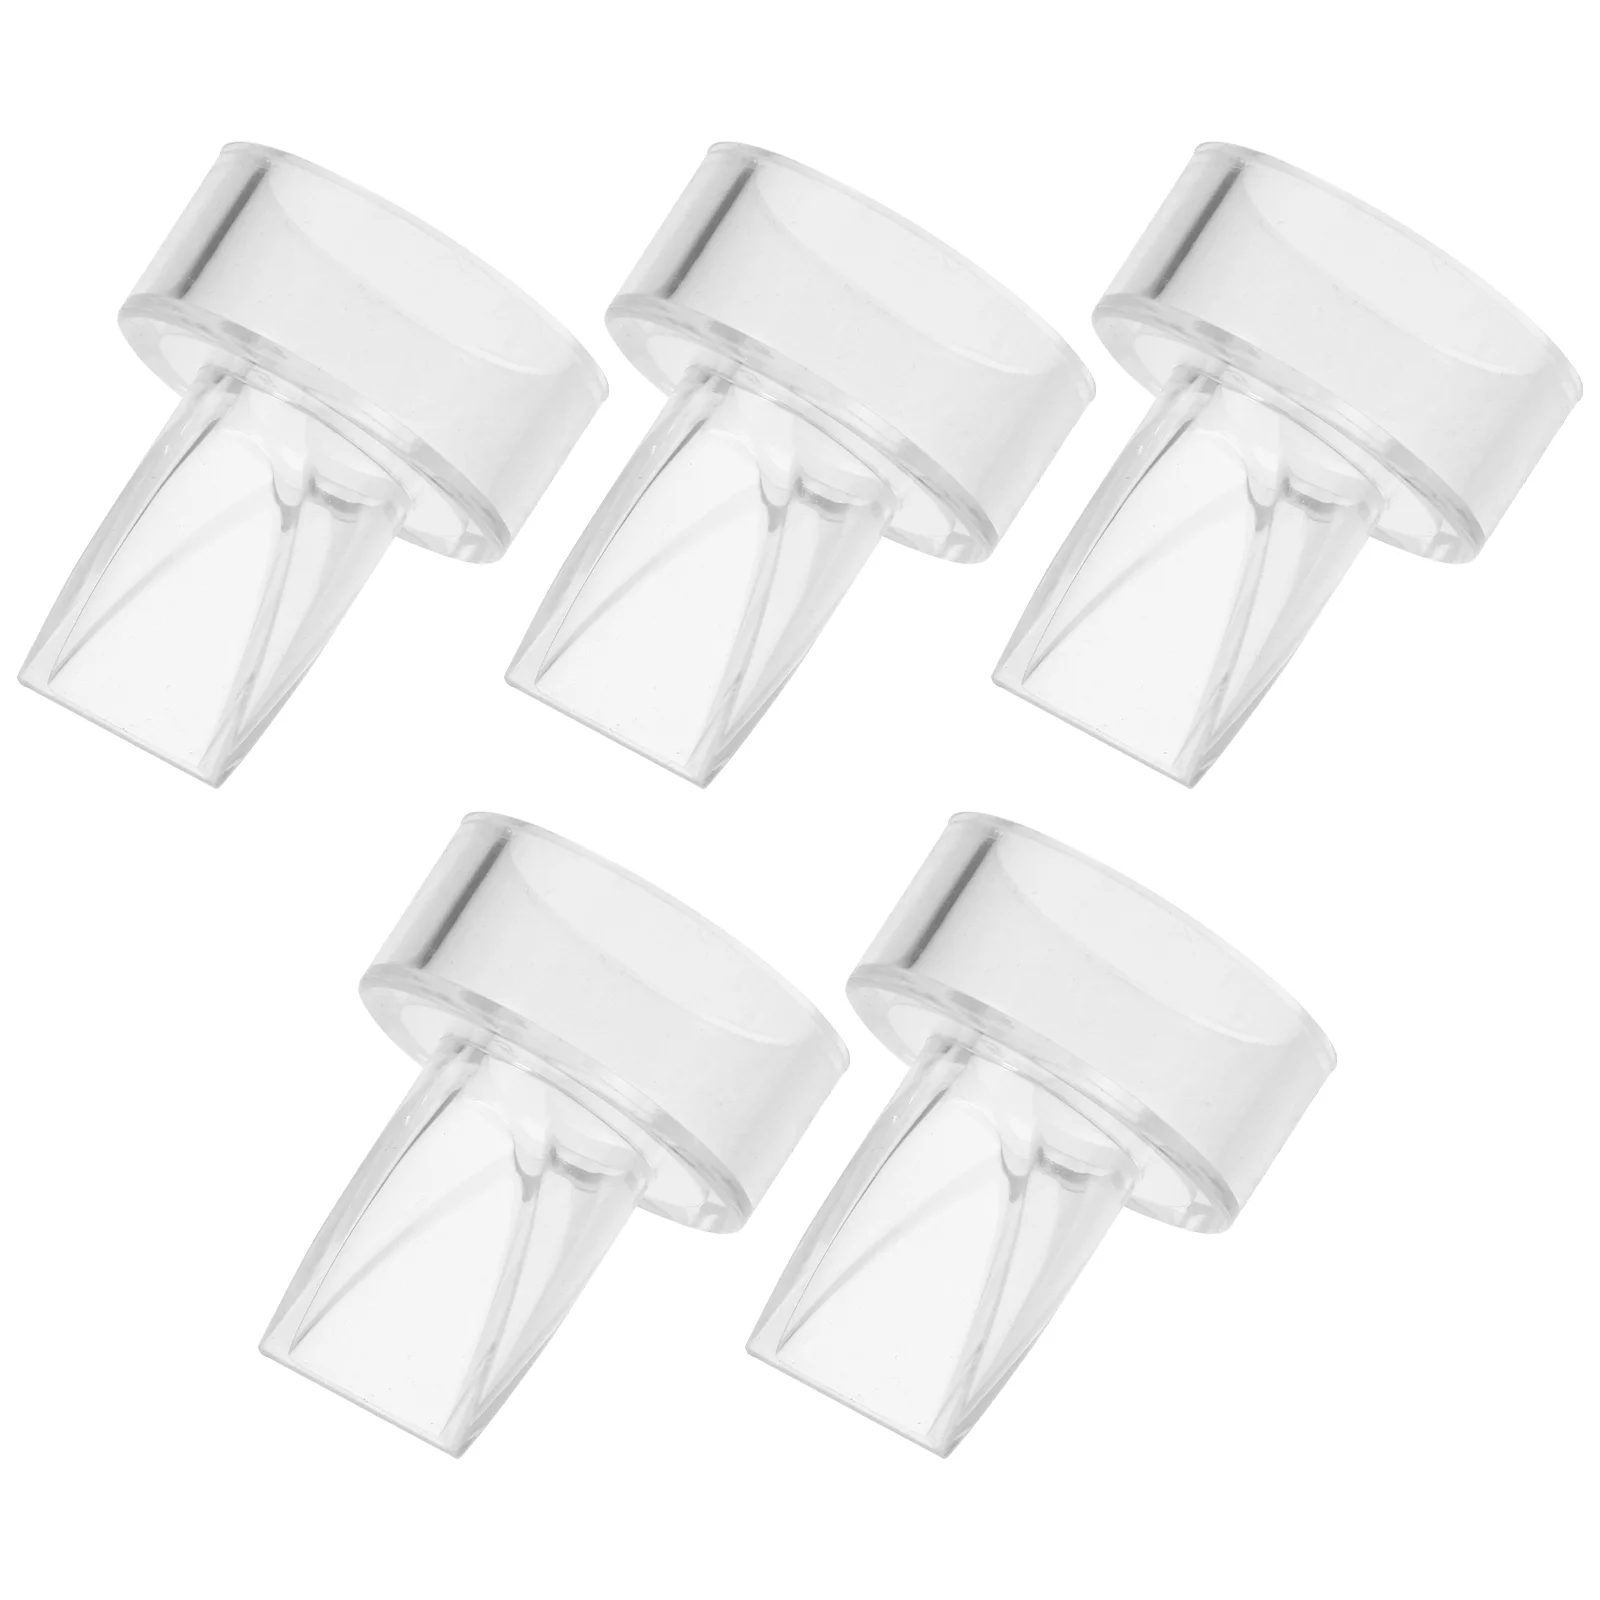 

5 Pcs Valve Electric Accessories Parts Women Valves Breast Pump Manual Silica Gel Silicone Baby Suction Bowls for